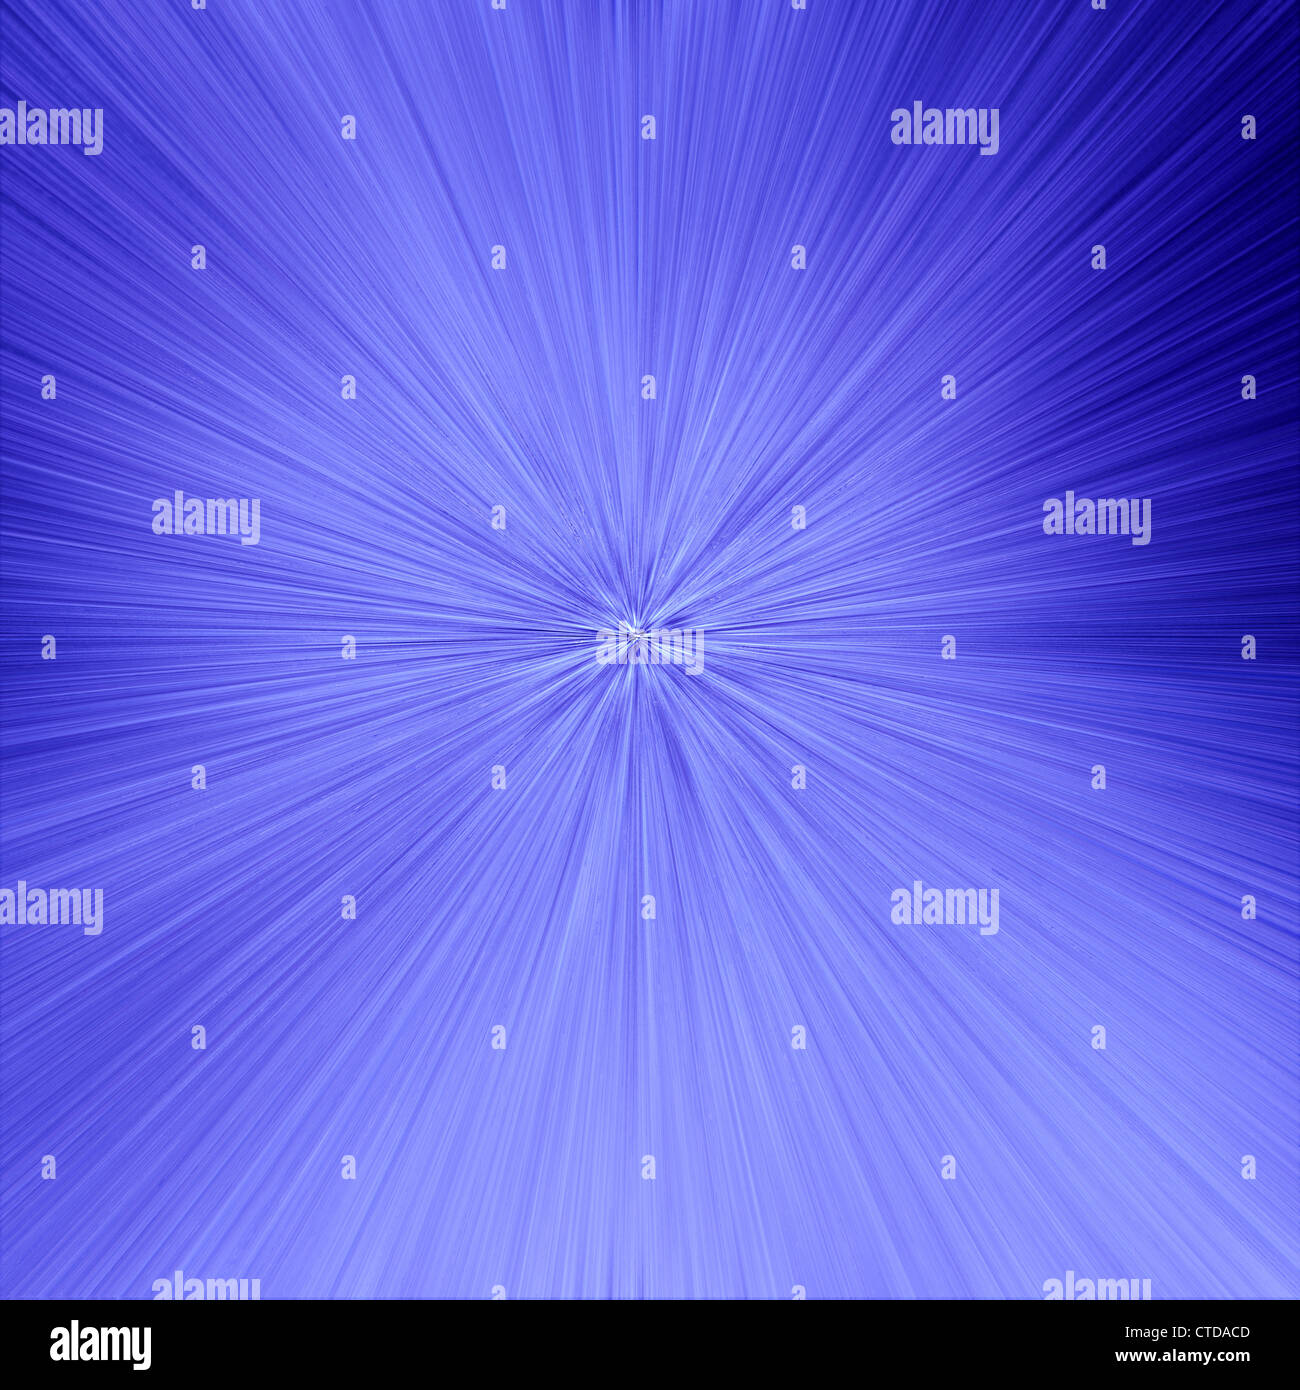 Blue straight lines converging Stock Photo